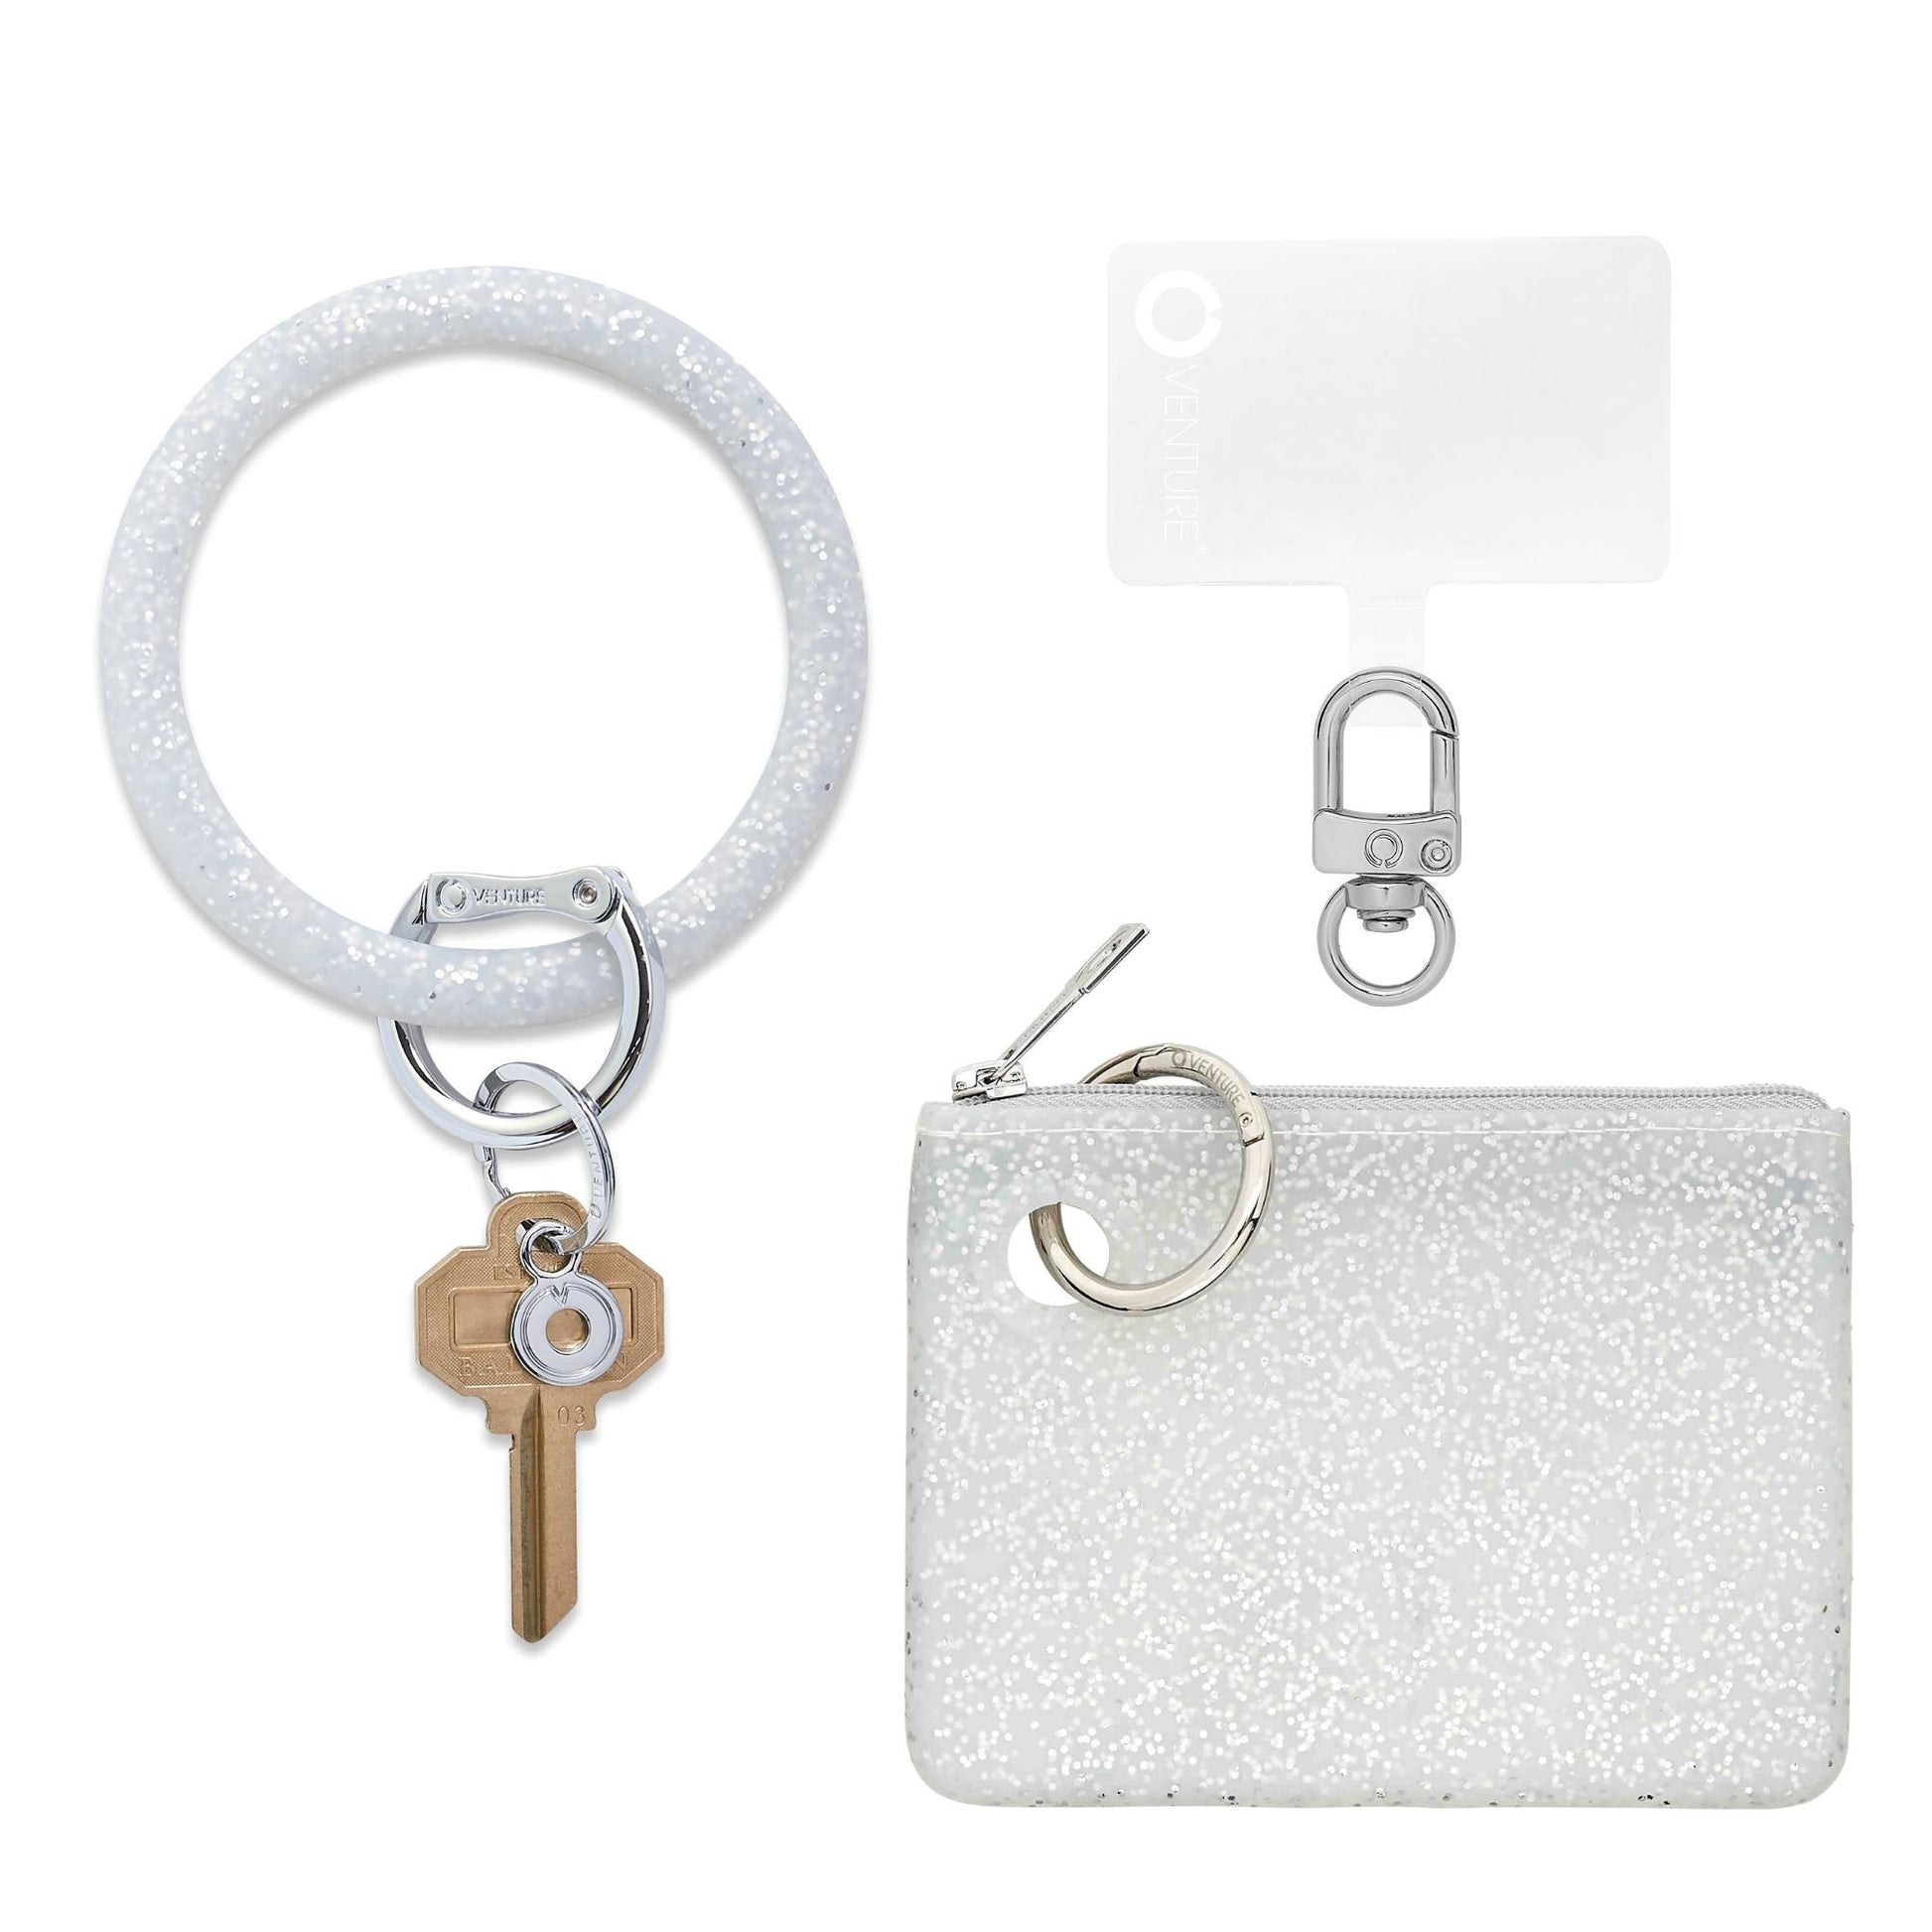 Stylish Mini Pouch Wristlet for Essentials and Phone